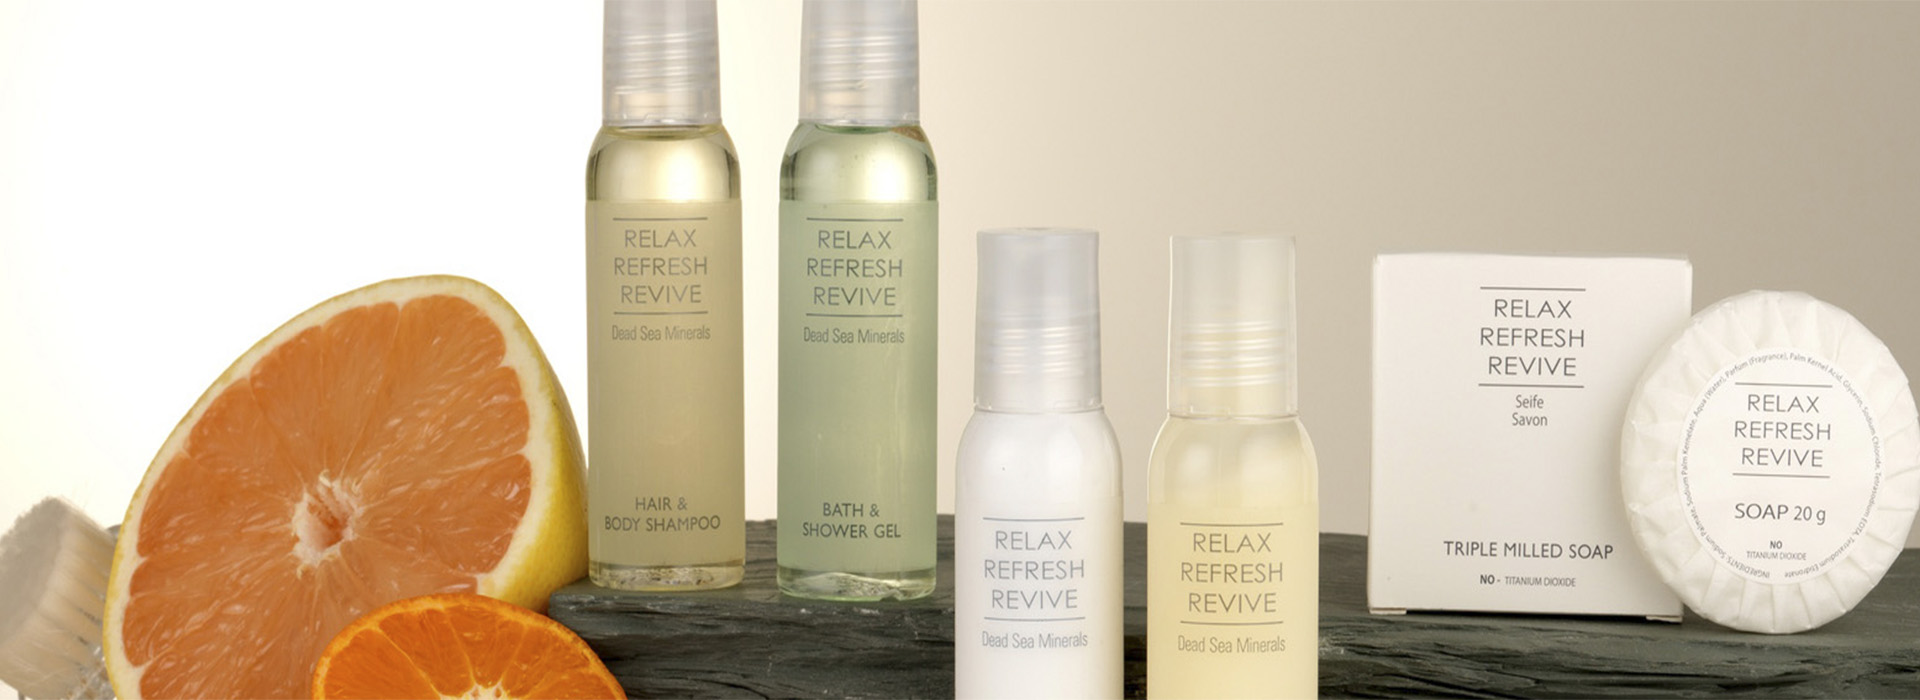 Relax refresh revive.